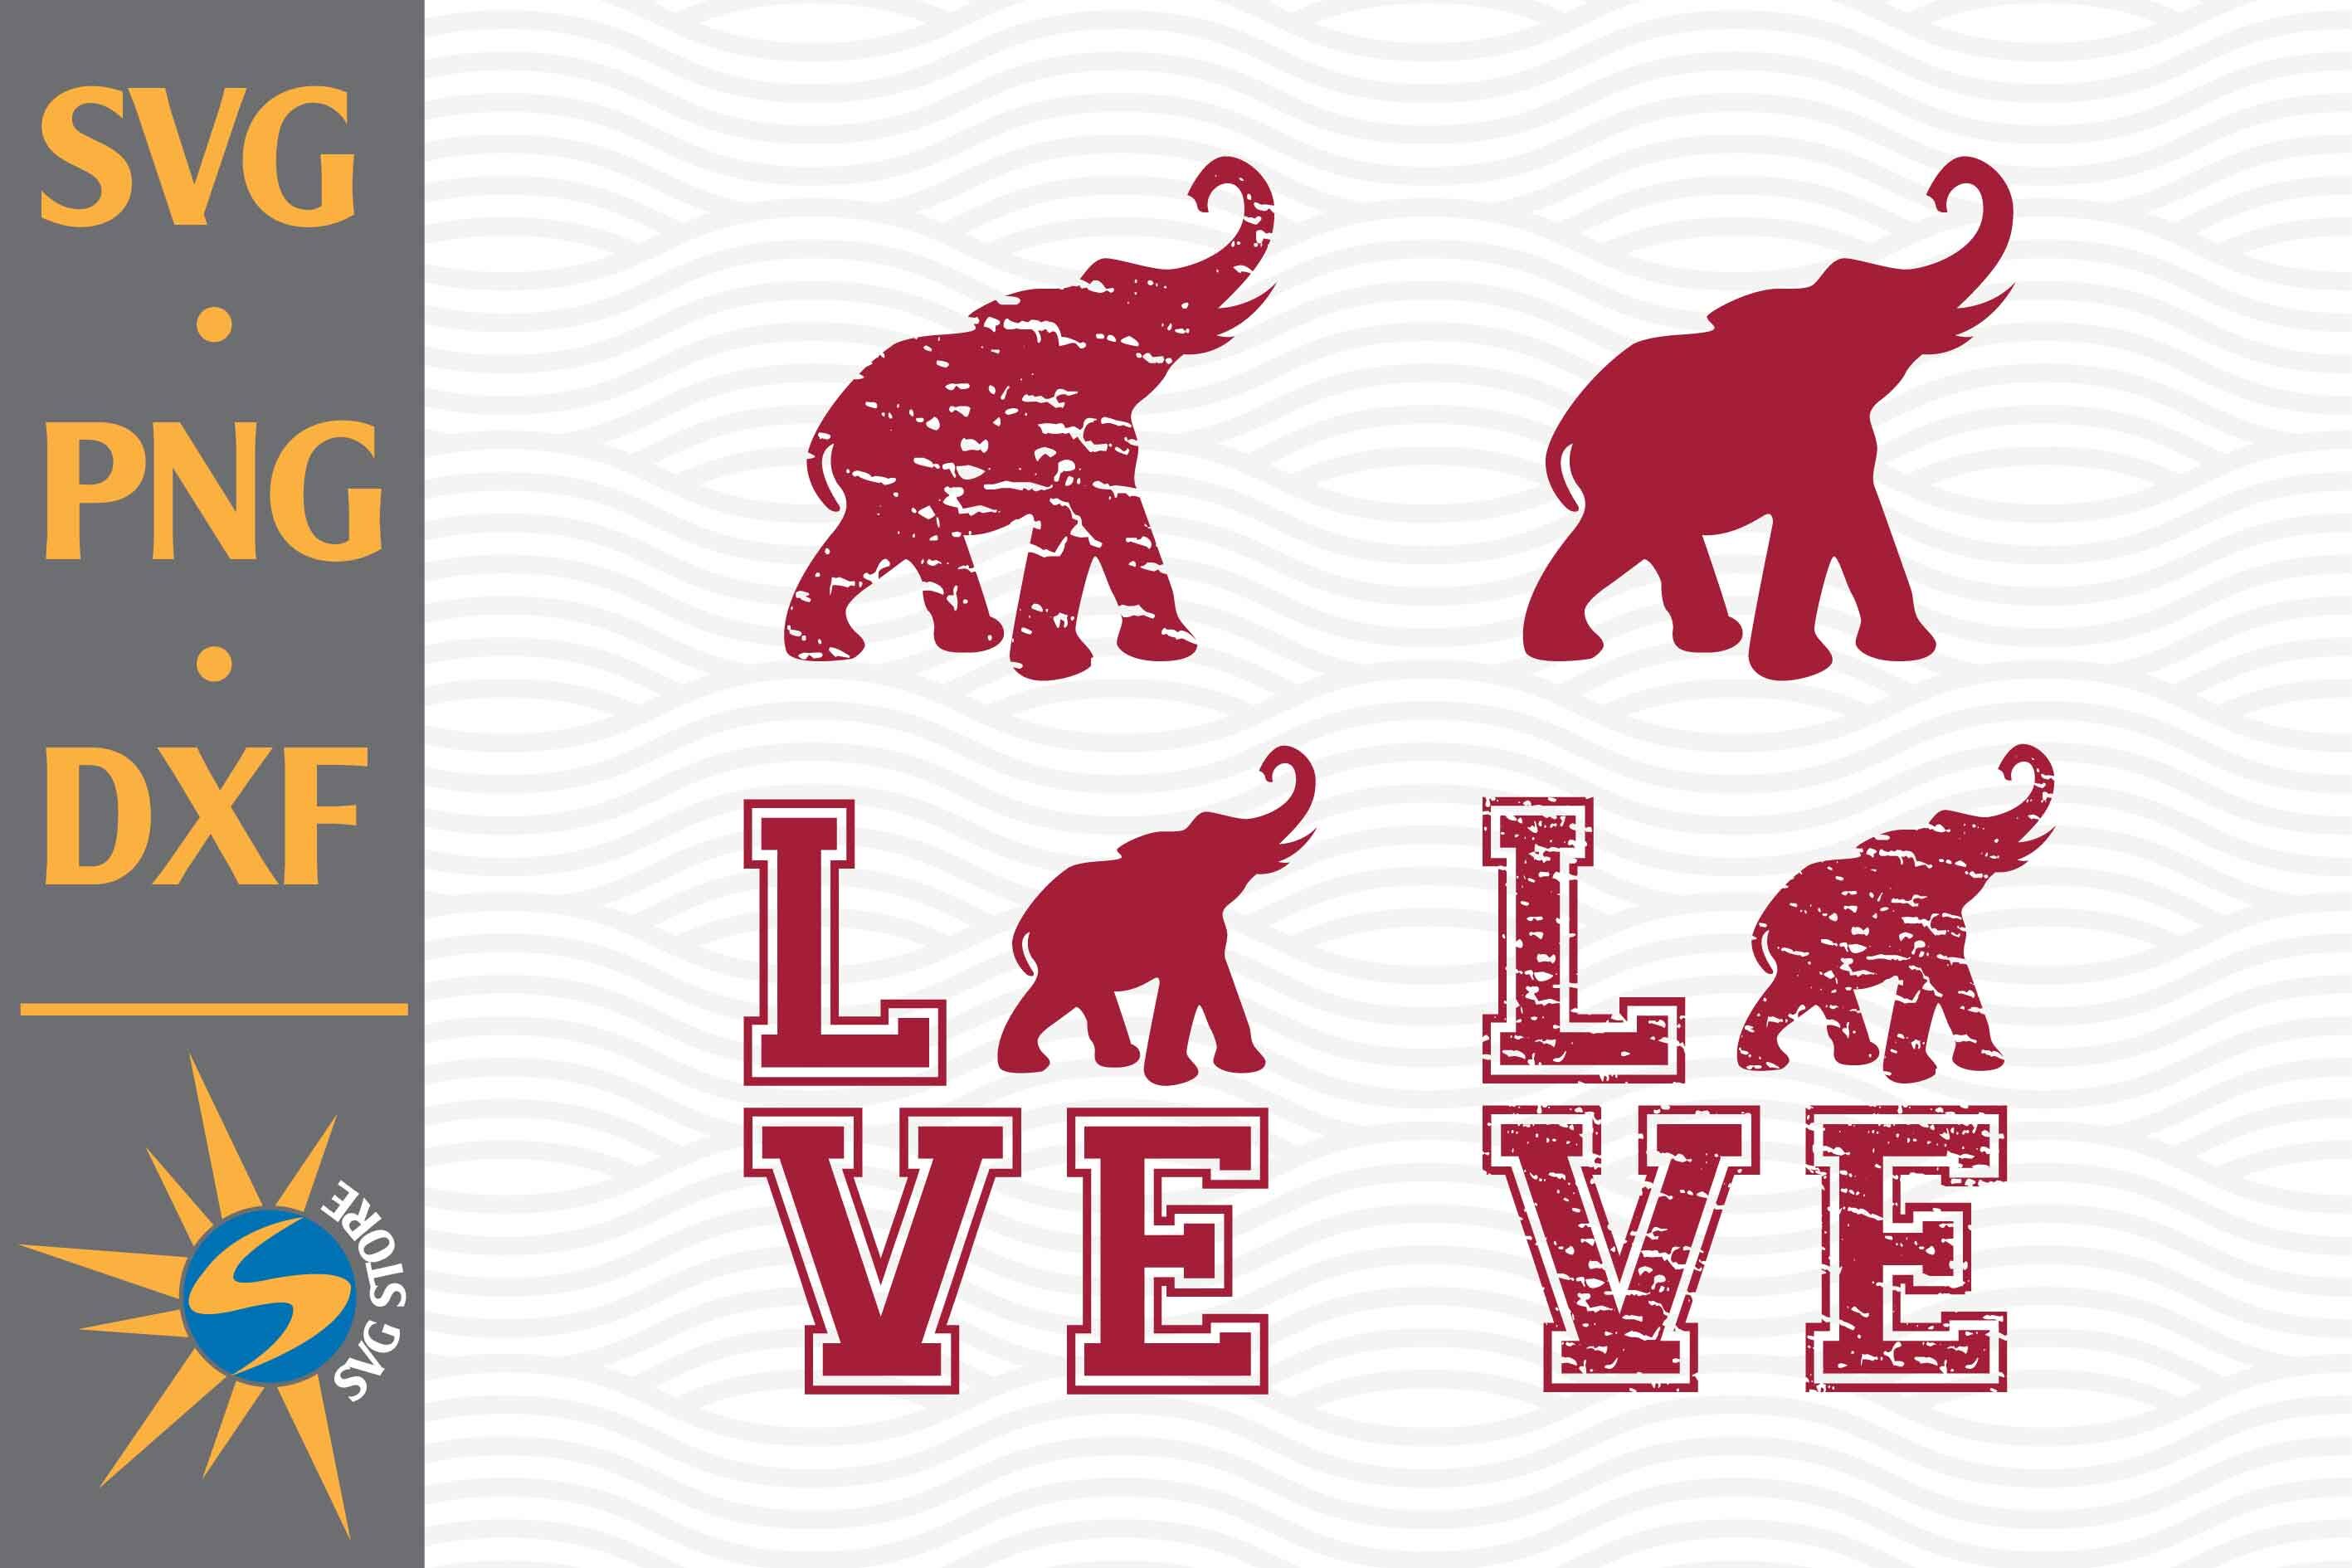 Elephant, Love Elephant SVG, PNG, DXF Digital Files Include By